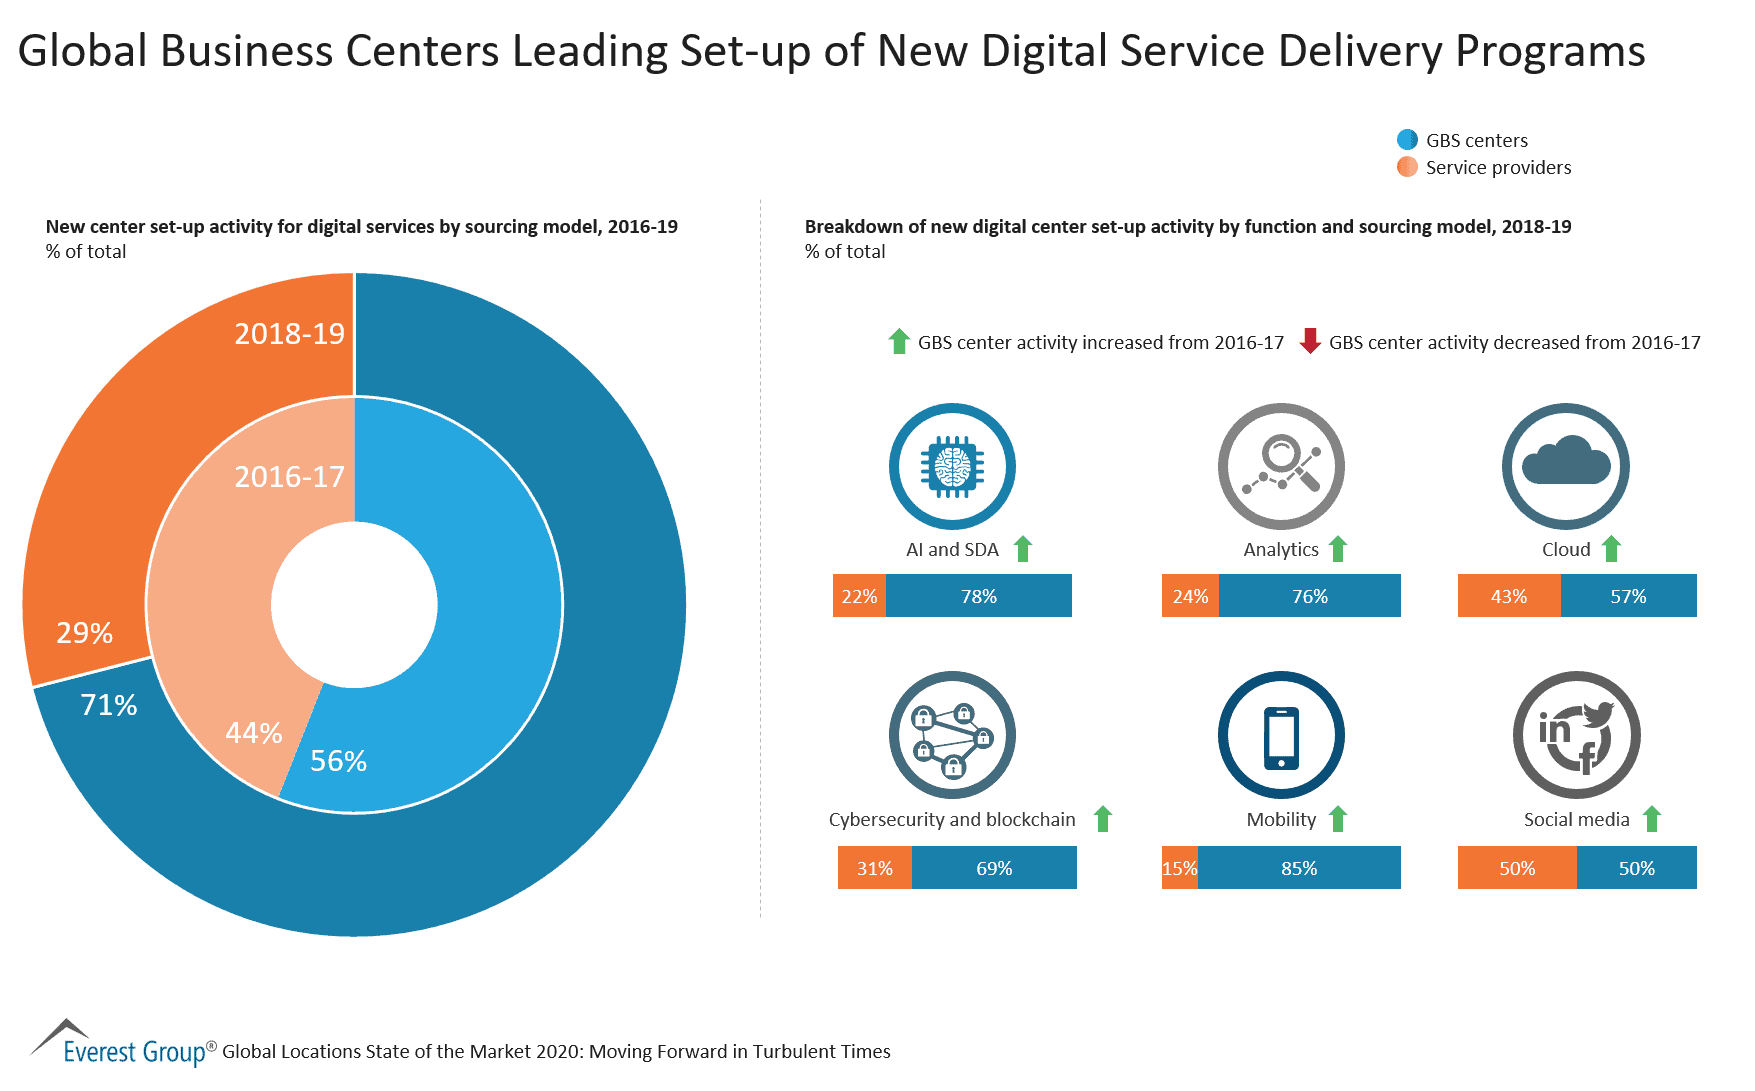 Global Business Centers Leading Set-up of New Digital Service Delivery Programs